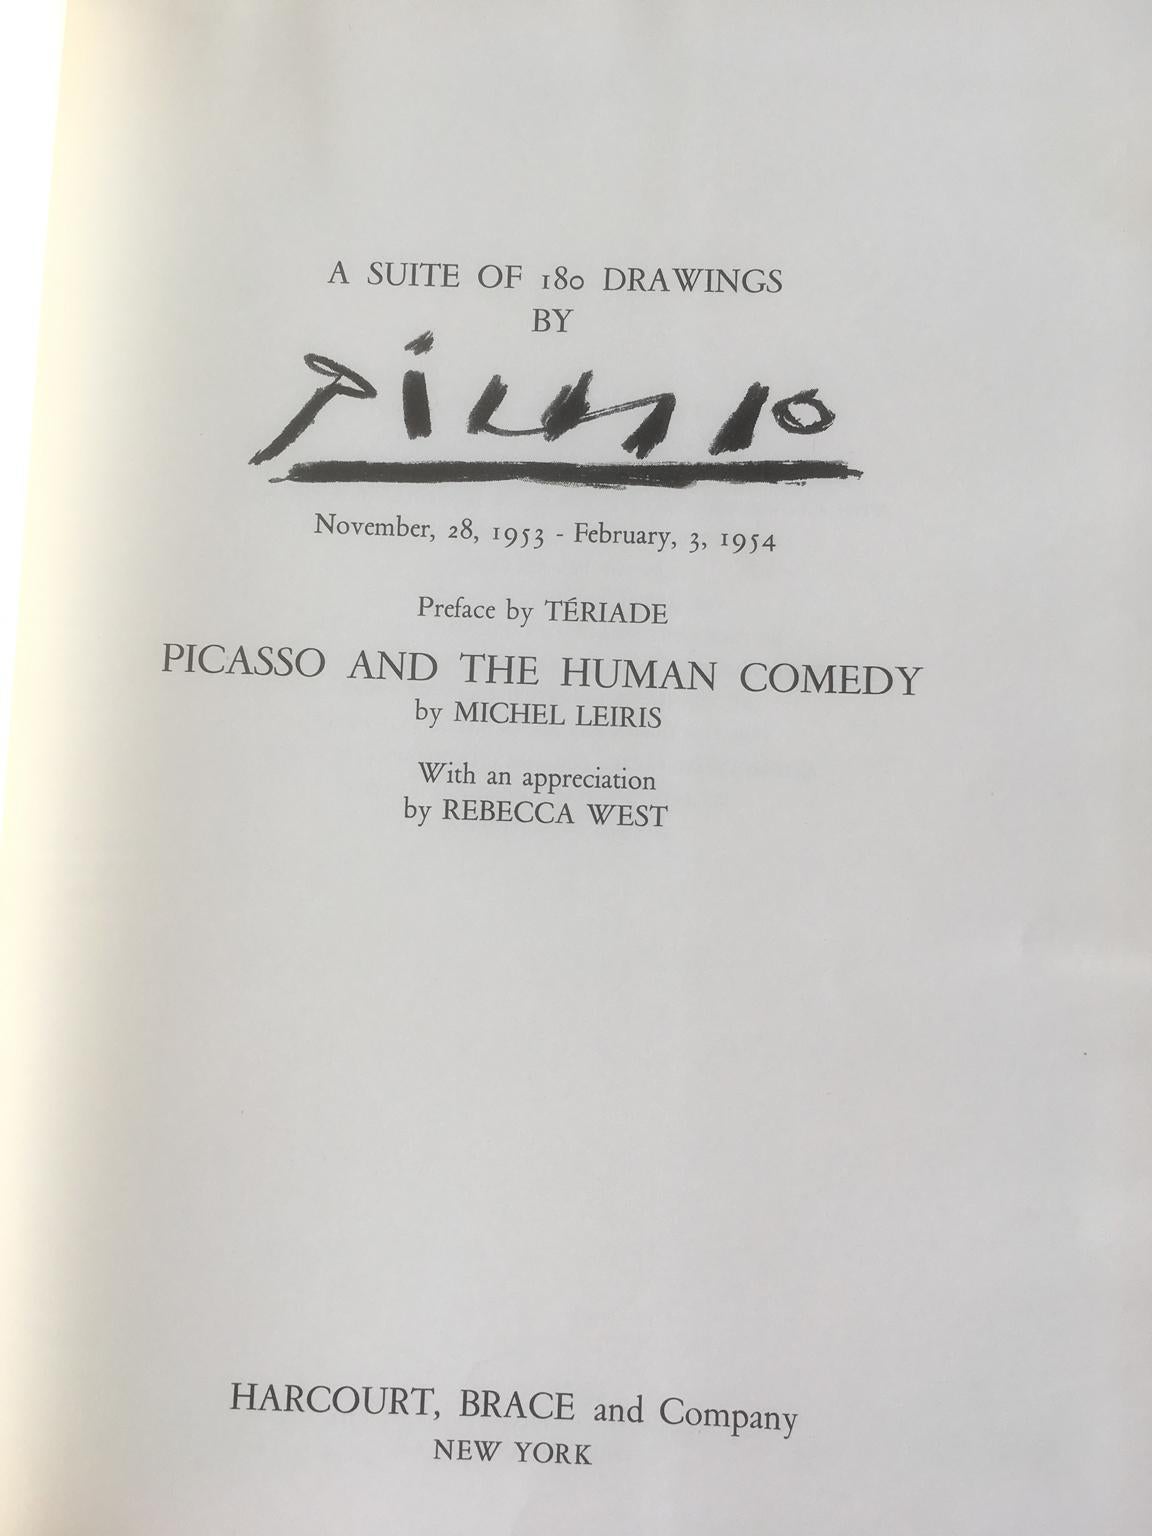 
The American Edition of Verve 29/30, published by Harcourt, Brace and Company, New York.
180 PICASSO drawings executed in Vallauris from 28 November to 3 February 1954. 164 heliogravure drawings by Draeger Frères, 16 color lithographs by Mourlot